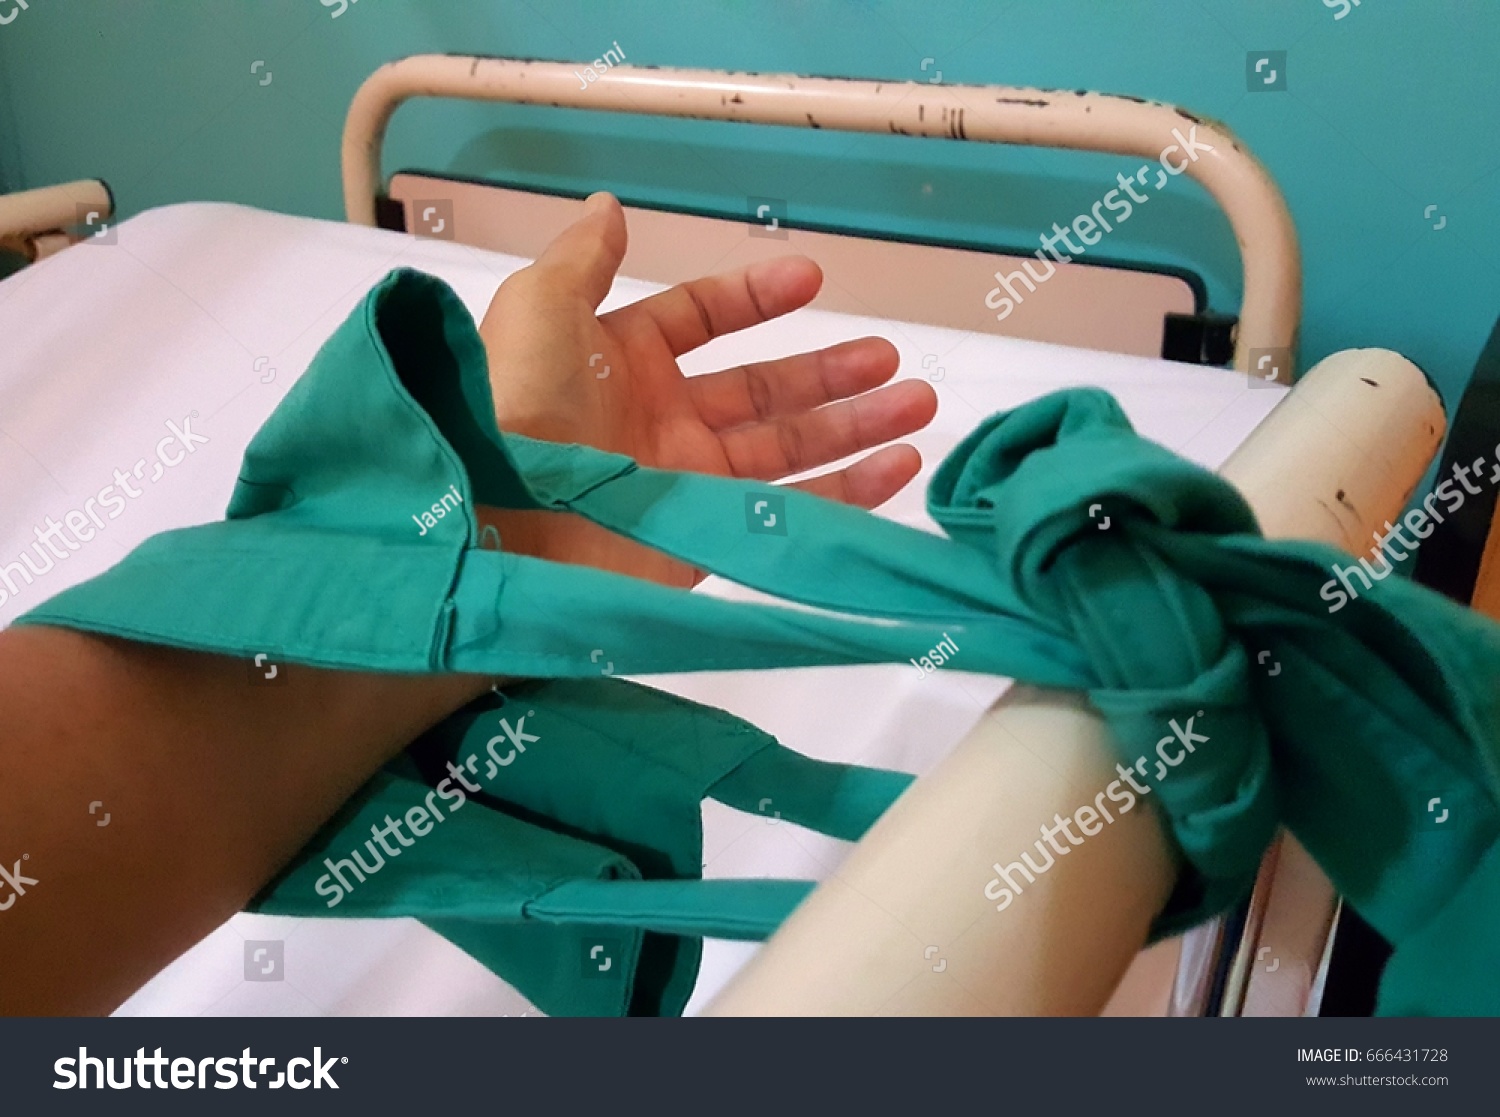 Close up image of patient hand restraint on hospital bed. #666431728